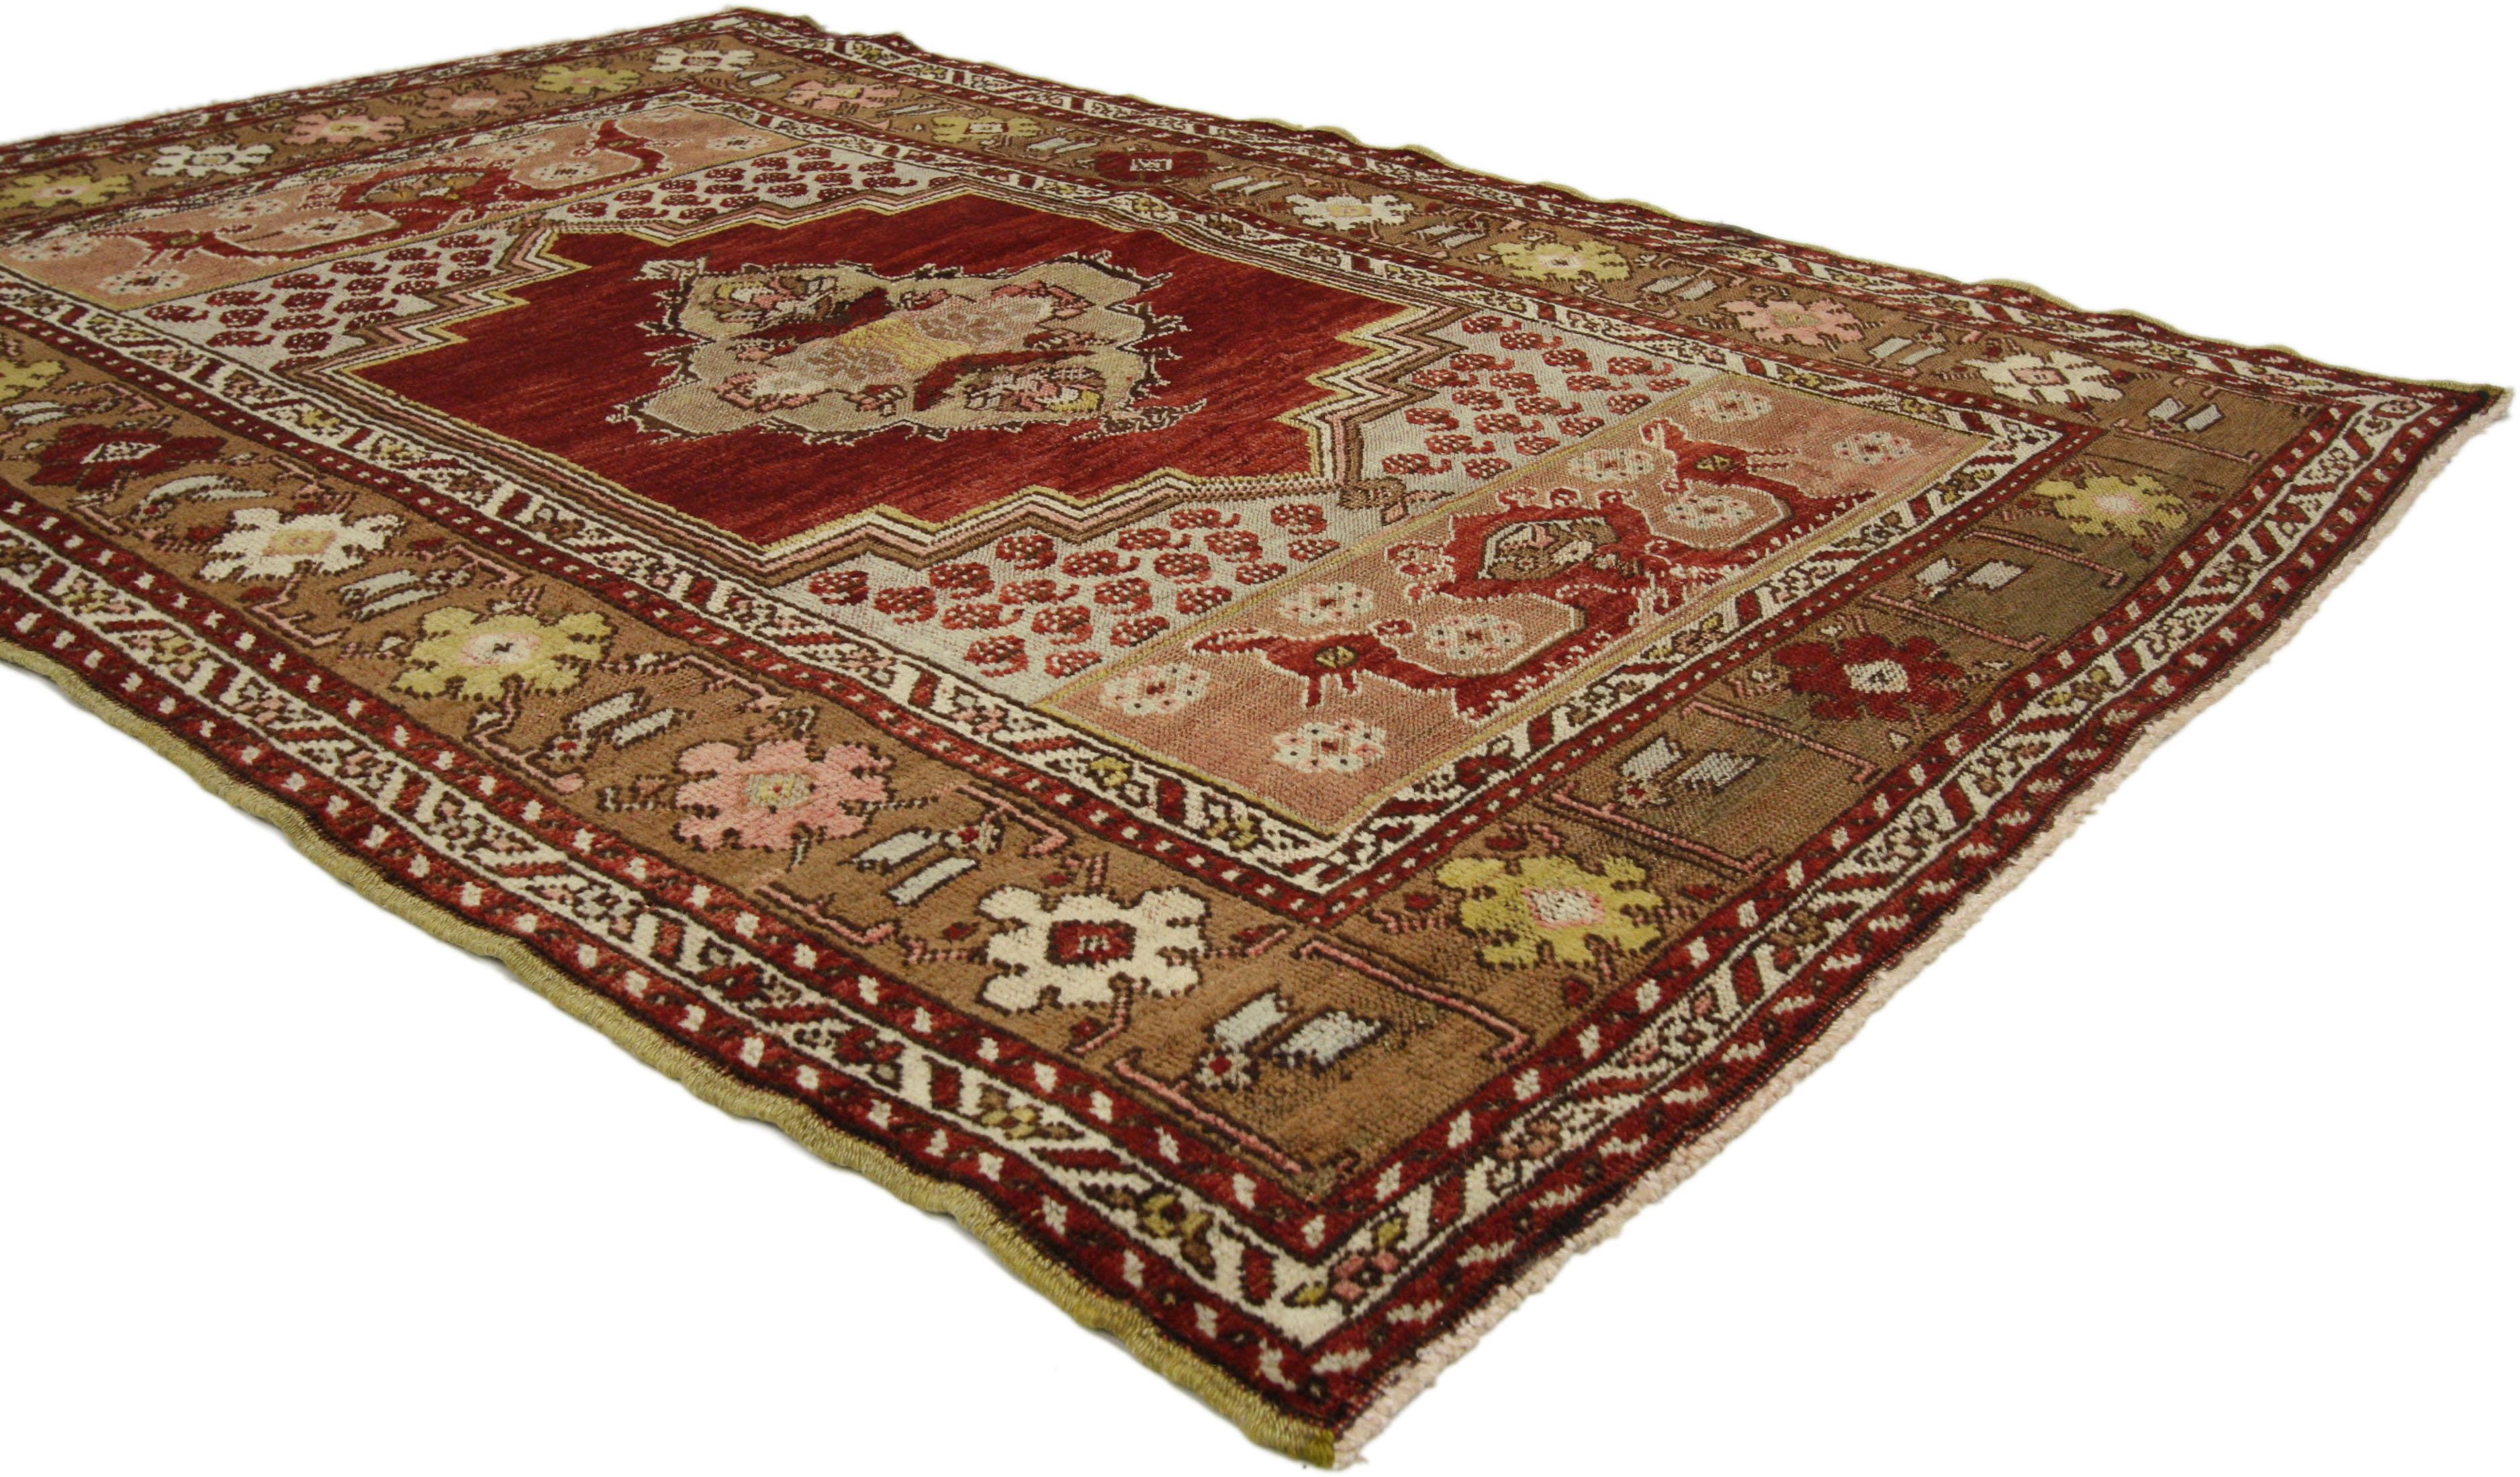 50077, vintage Turkish Oushak rug for kitchen, bathroom, foyer or entry rug. This vintage Turkish Oushak rug features a modern traditional style. Immersed in Anatolian history and refined colors, this vintage Oushak rug combines simplicity with